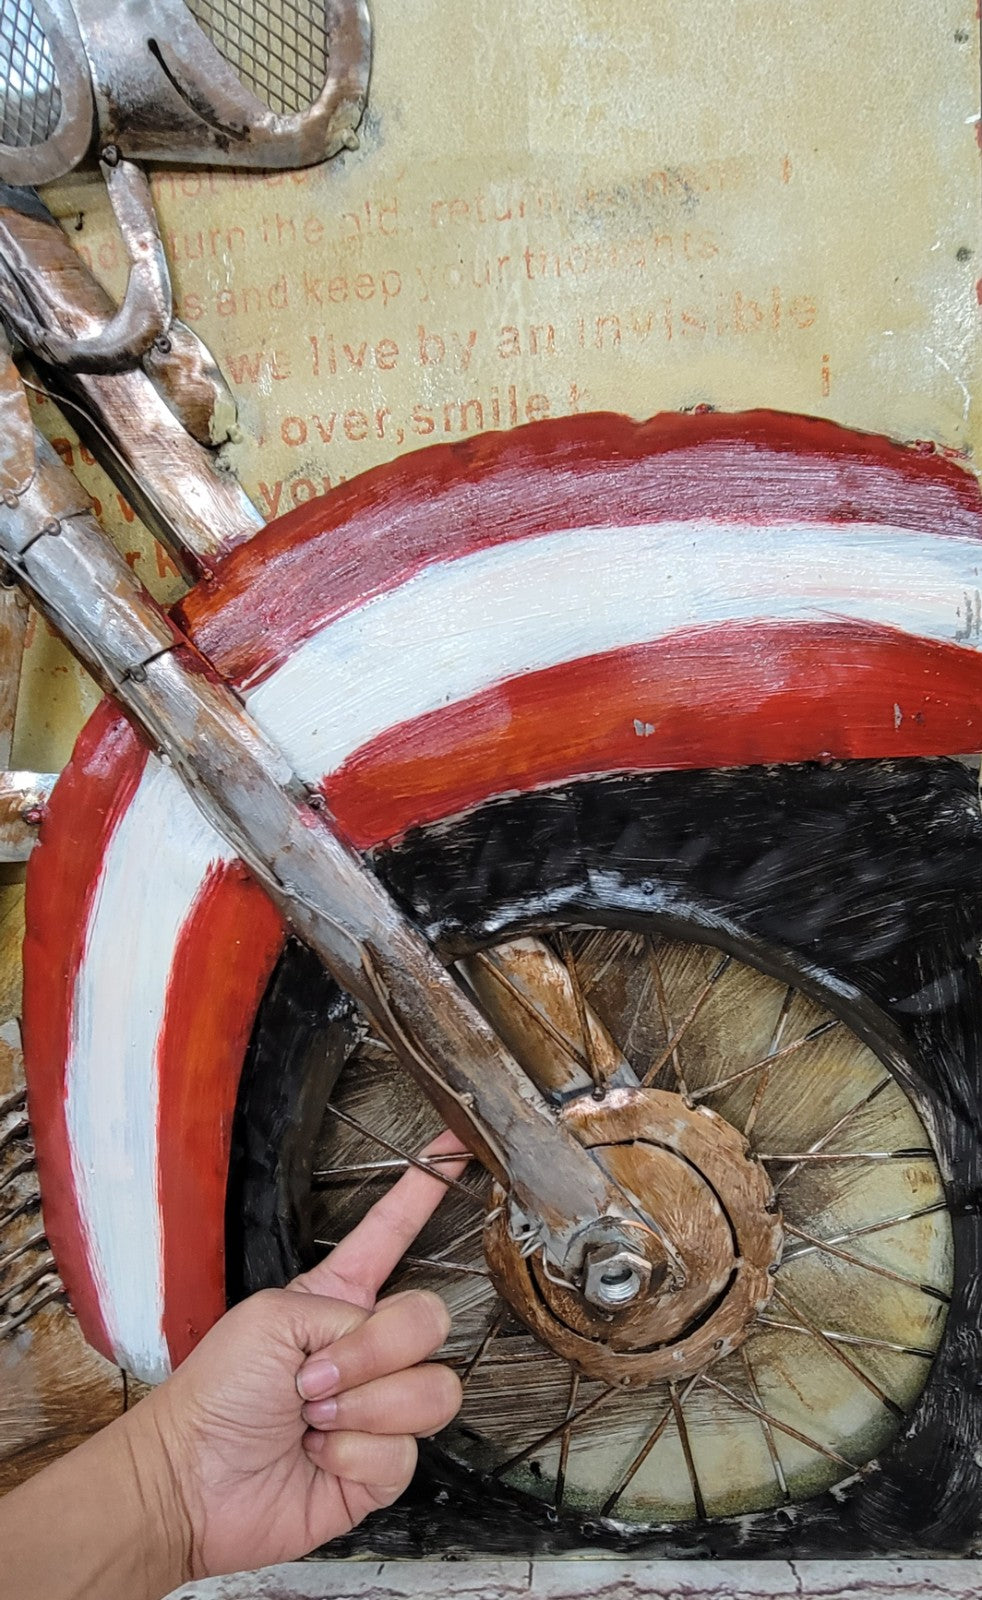 American Flag Eagle Motorcycle - 3D Full Metal Painting  Home Decor or Gifts